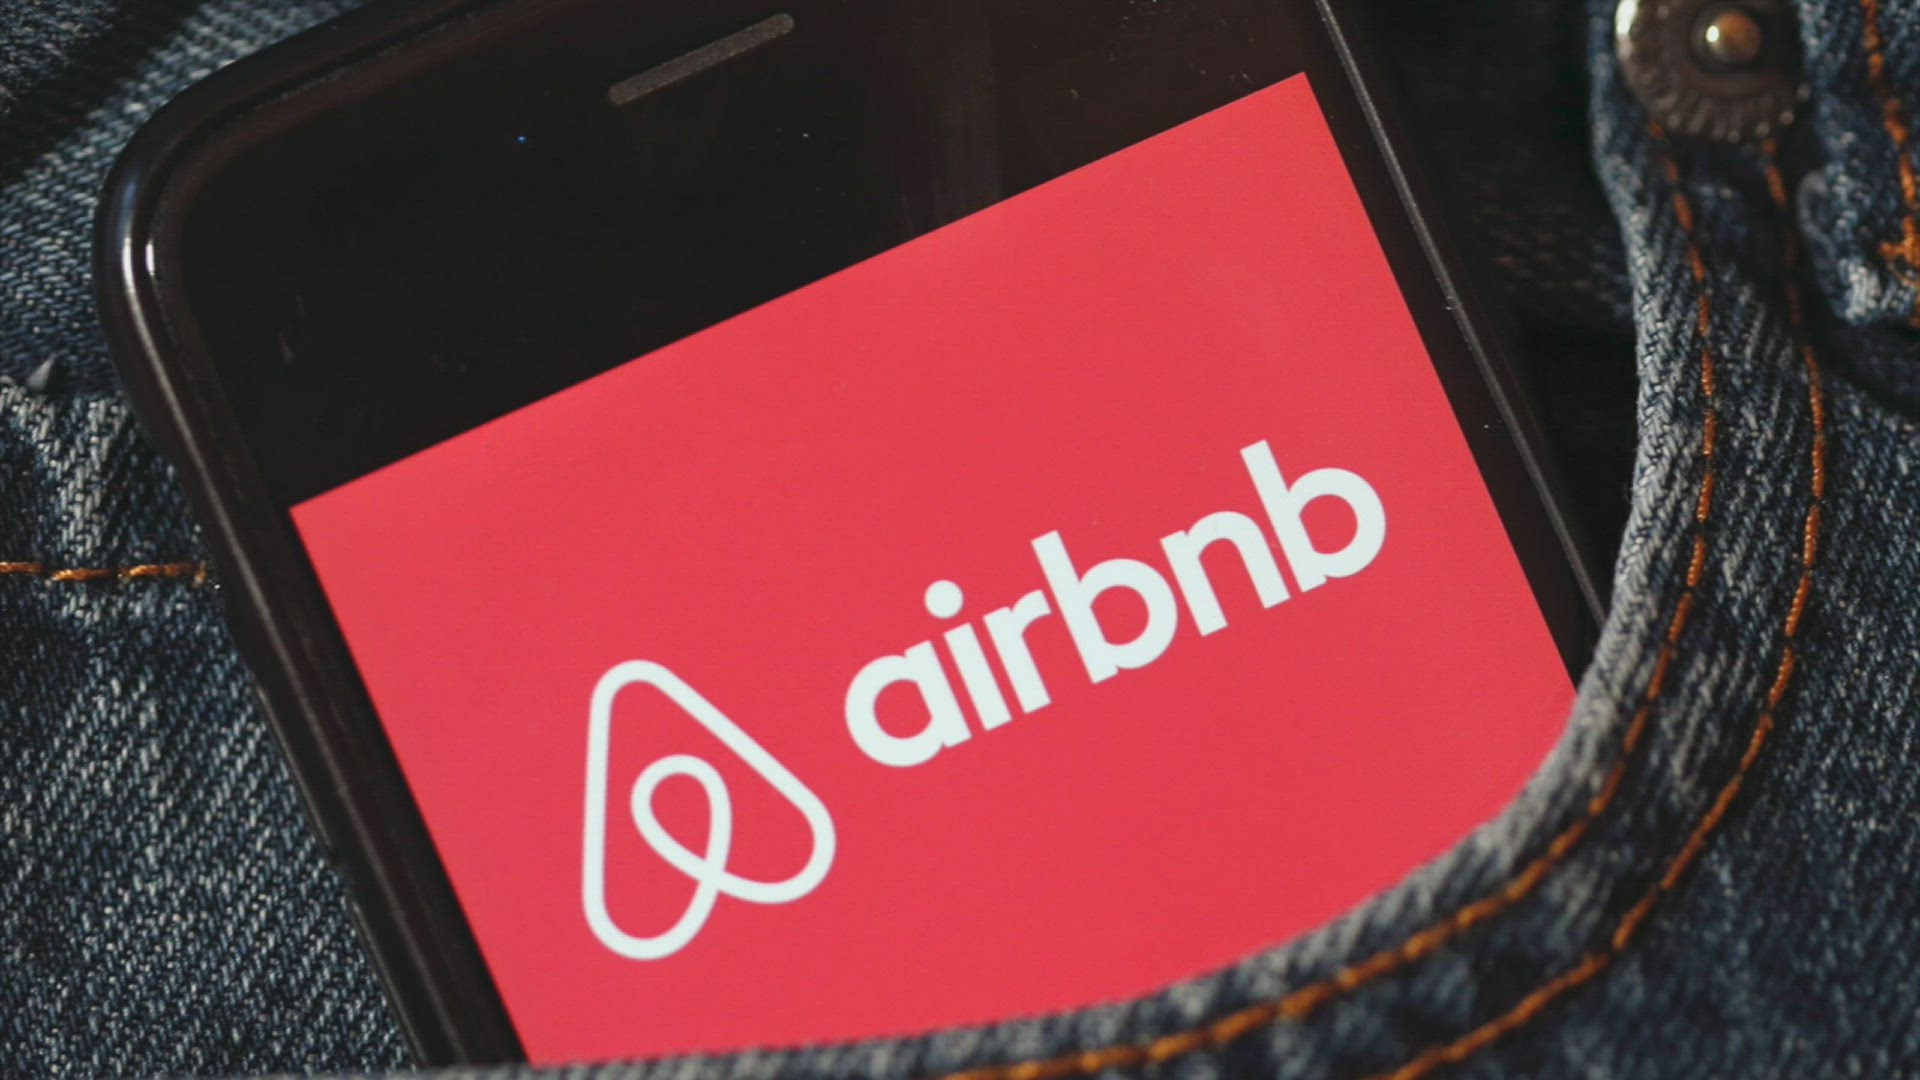 Airbnb is canceling all reservations in the Washington DC metro area during Inauguration week. Veuer's Elizabeth Keatinge tells us what else they are doing to prevent hate groups from using the platform to carry out violent crimes.